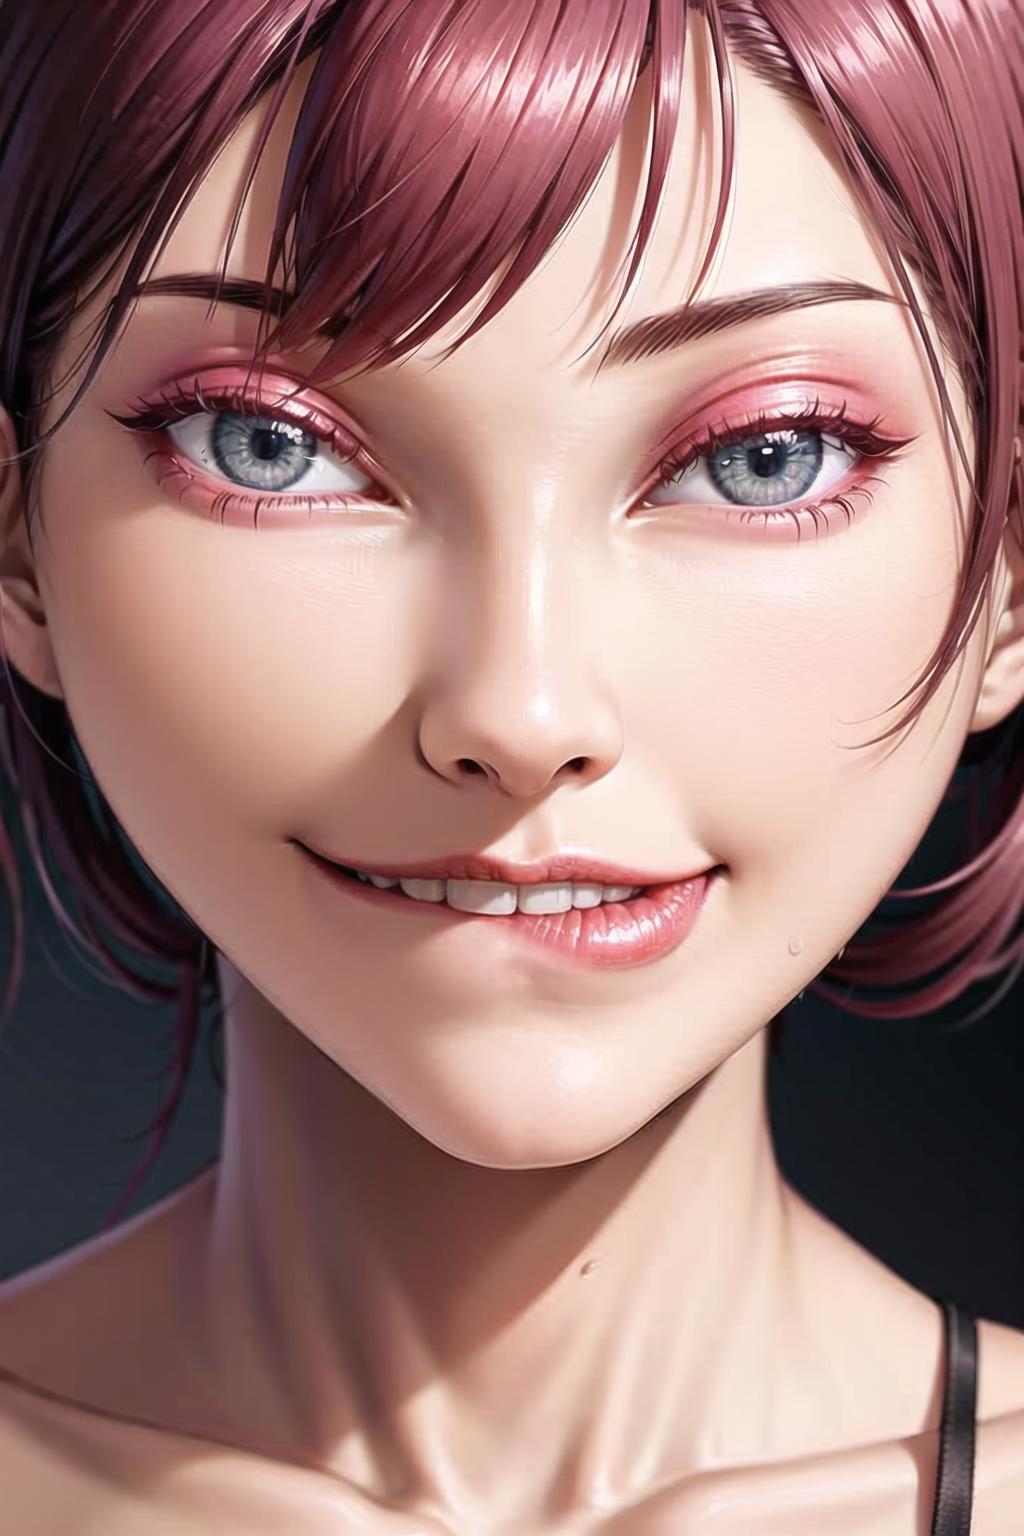 AI model image by aDDont